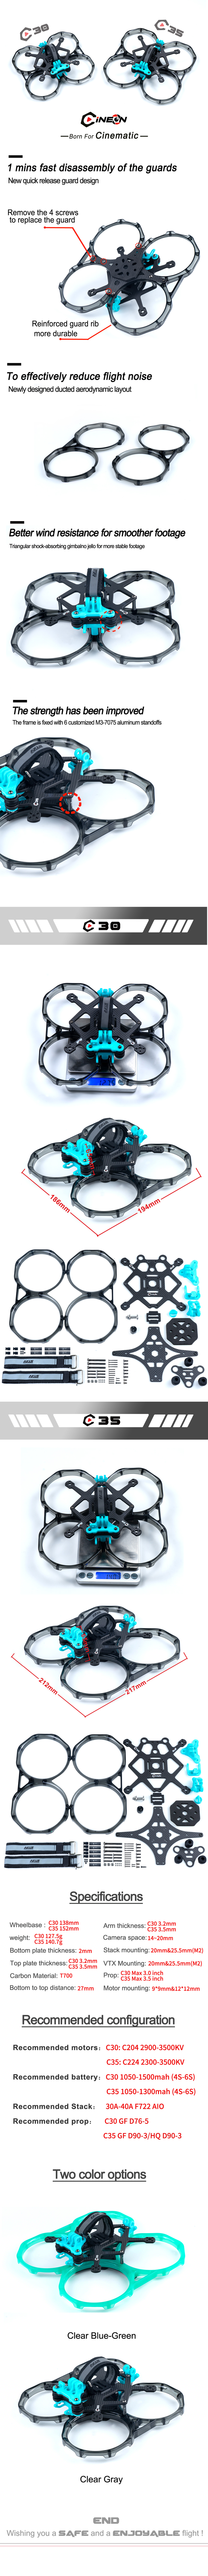 Axisflying C35 combo-Aluminum camera plates and GPS TPU - Get free 2 sets Props and 1 set Guards  C35 frame kit combo  cinematic drone,cinewhoop drone,longrange drone,freestyle drone,fpv drone,fpv quads,3.5" cinematic drone,3.5" cinematic quads,3.5" cinewhoop quads,3"cinewhoop quads,3"cinematic quads